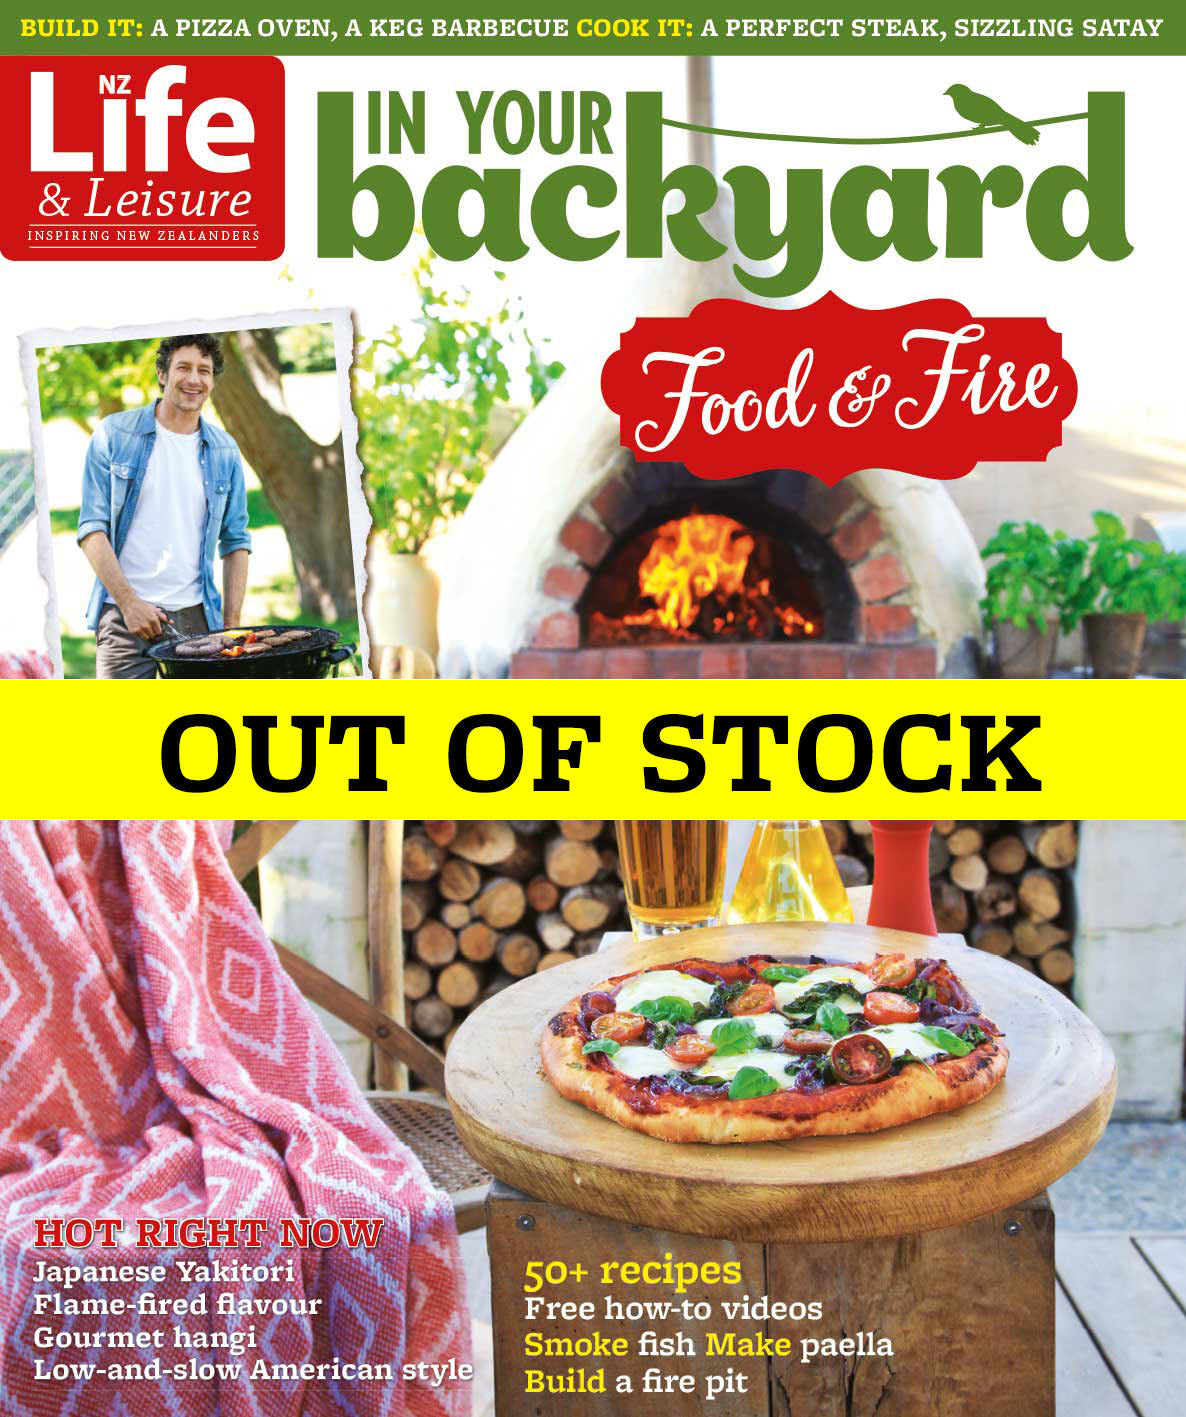 In Your Backyard: Food & Fire